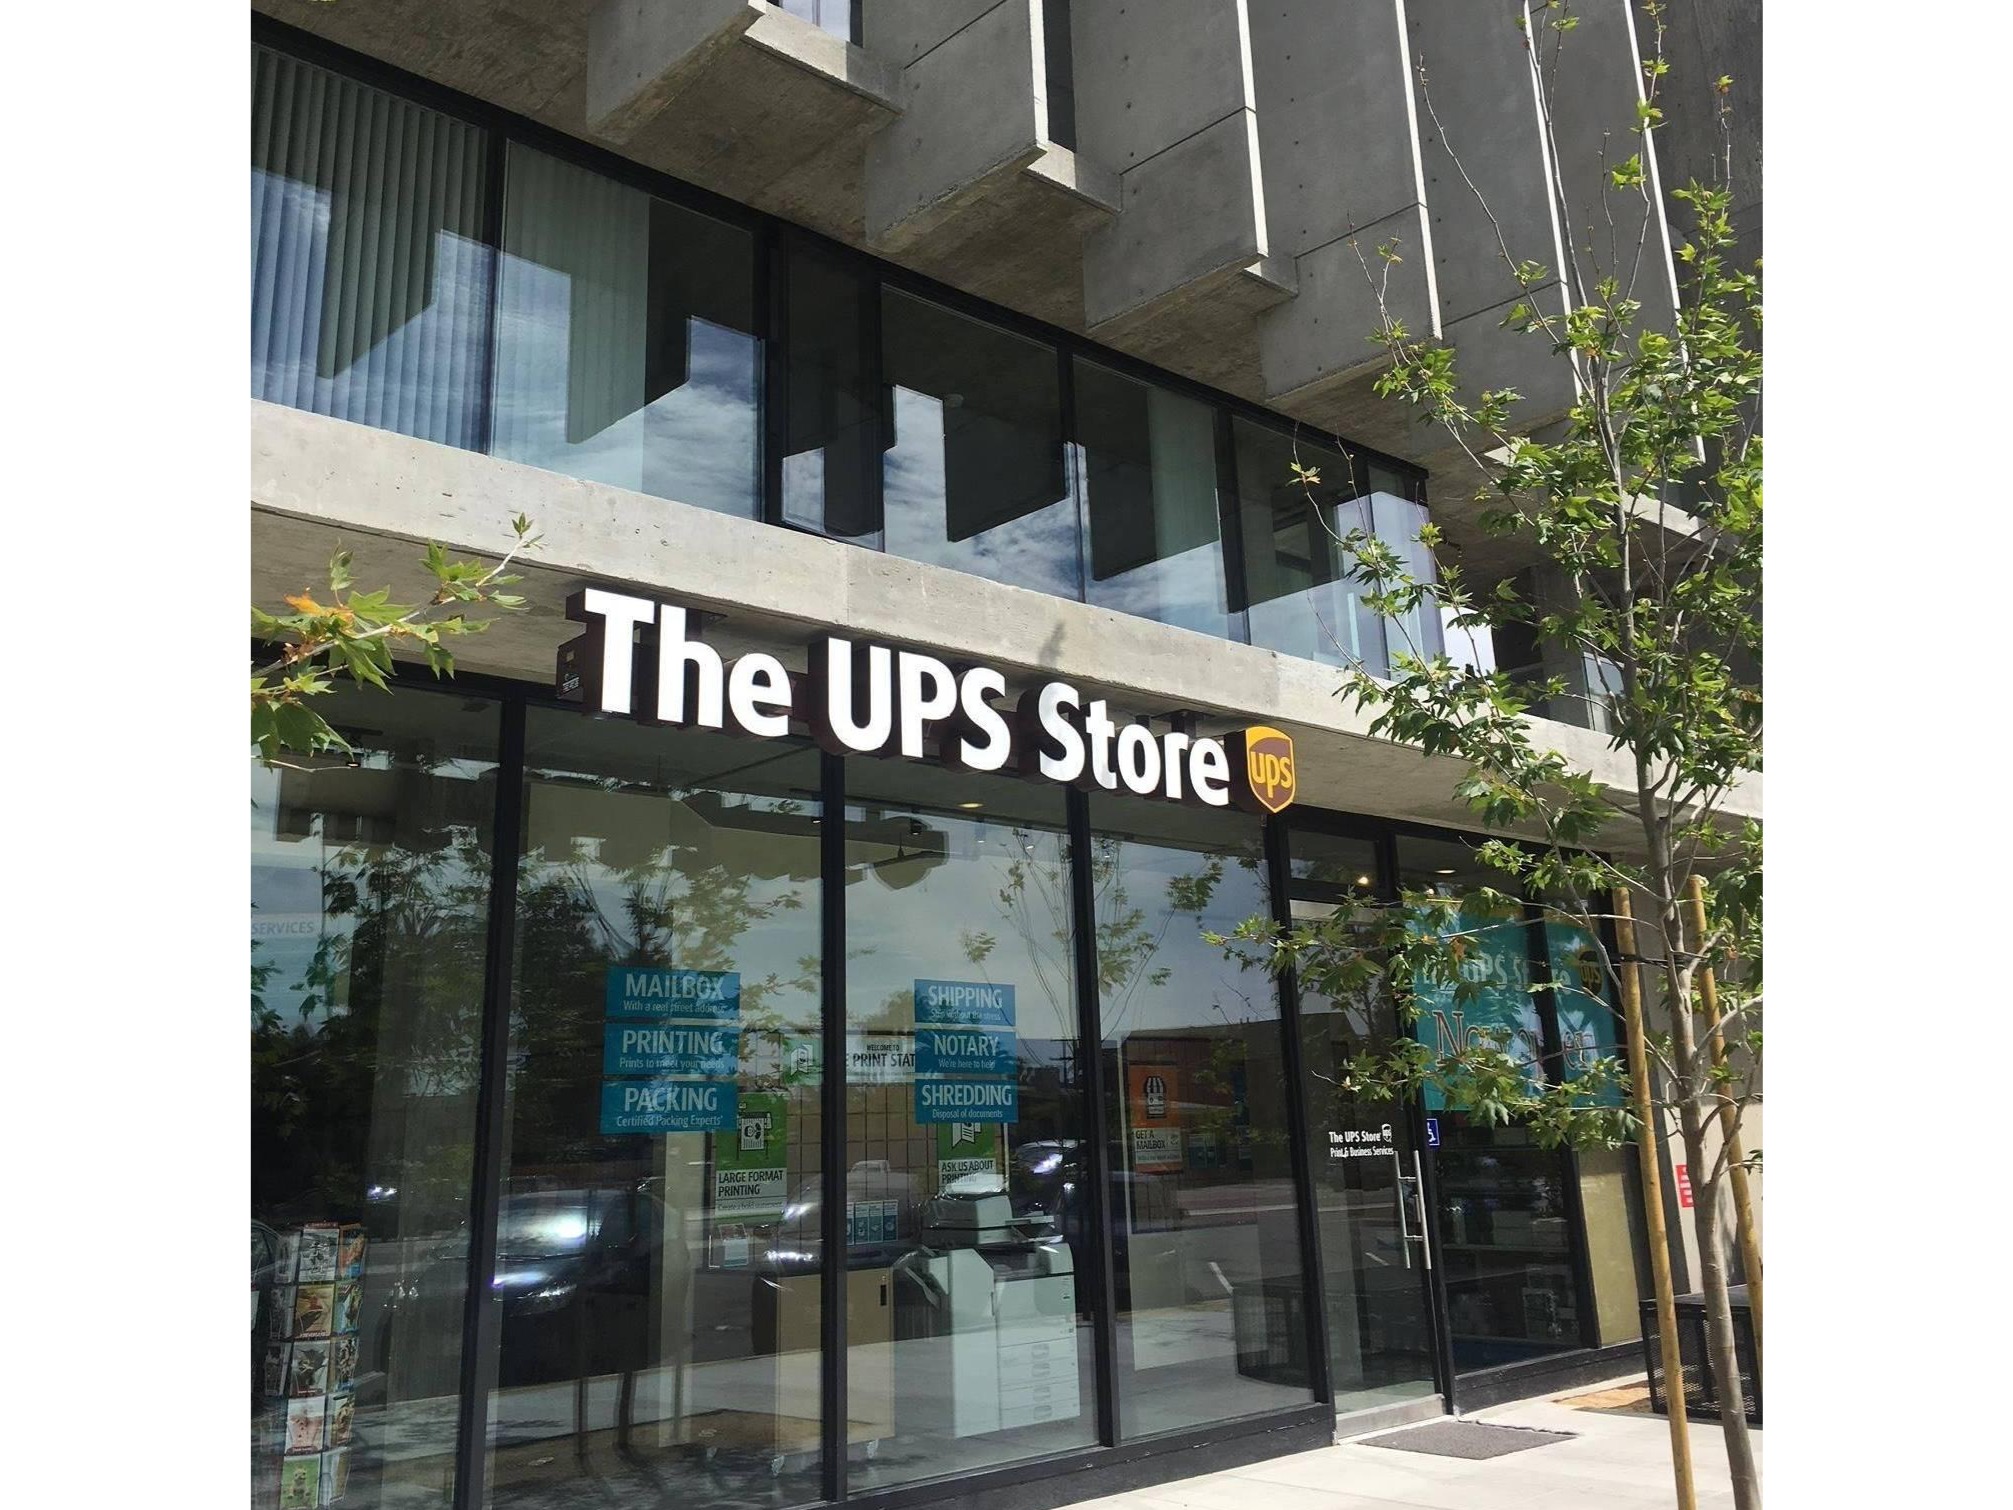 Facade of The UPS Store University Heights, North Park, and Hillcrest